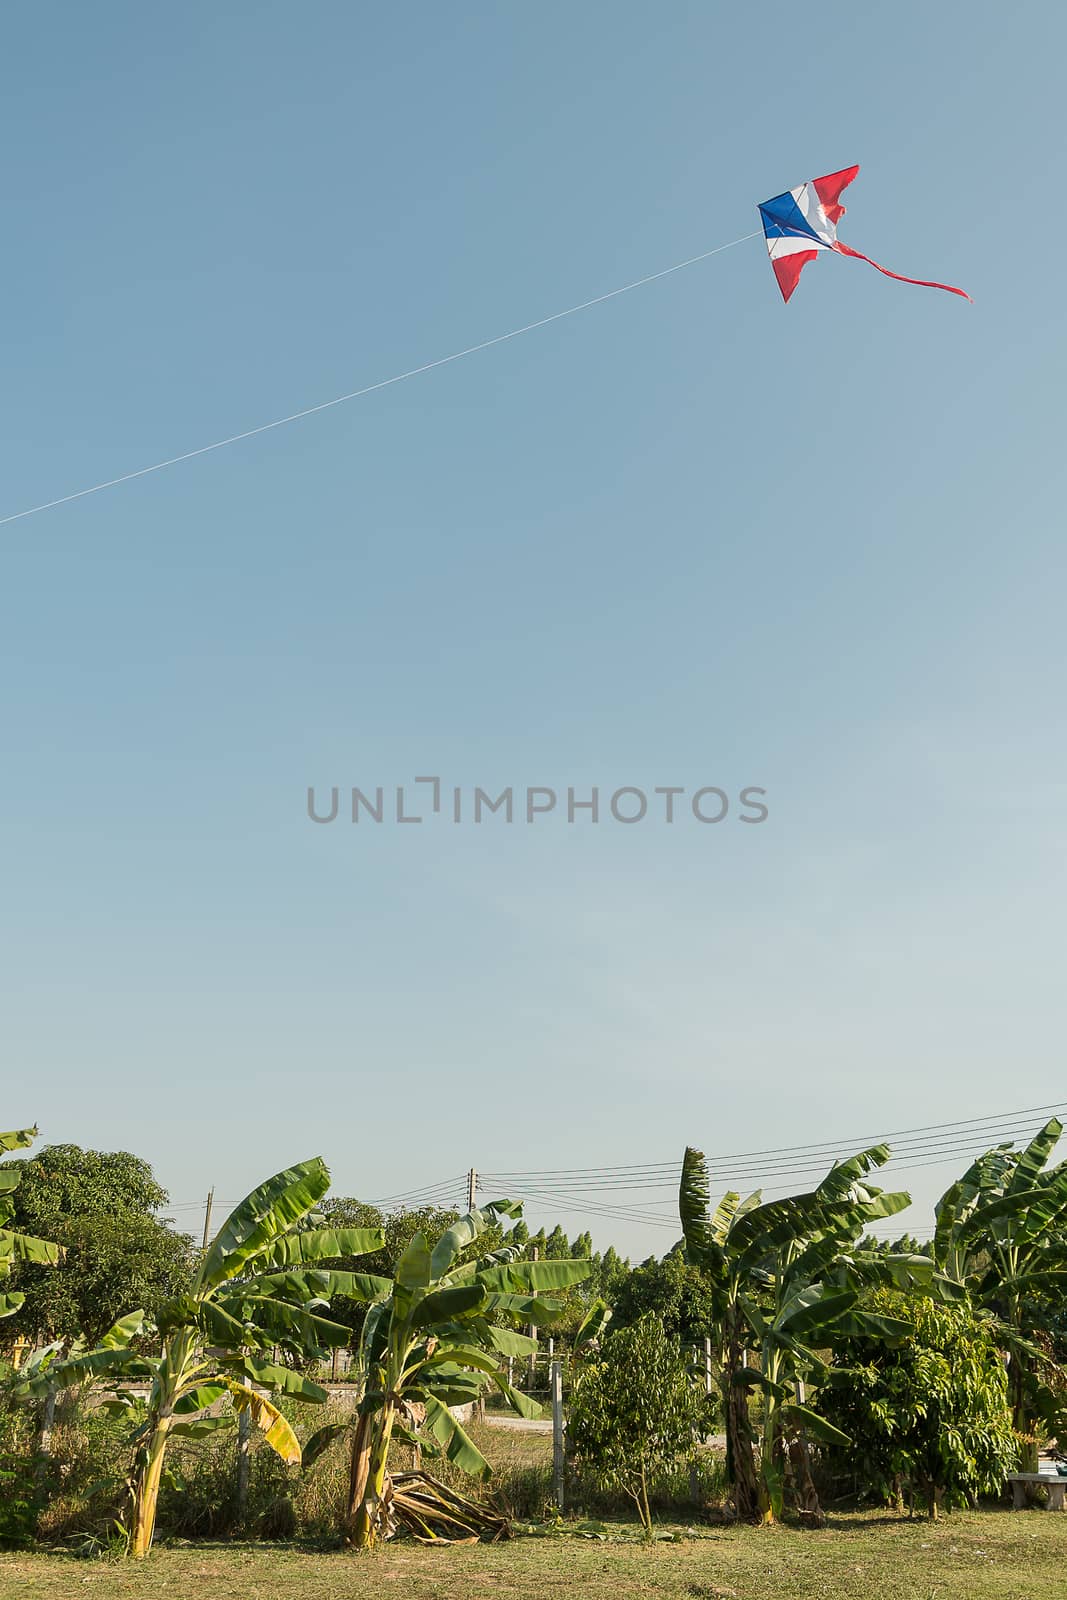 Kite flying in the wind and clear sky with banana trees at the bottom